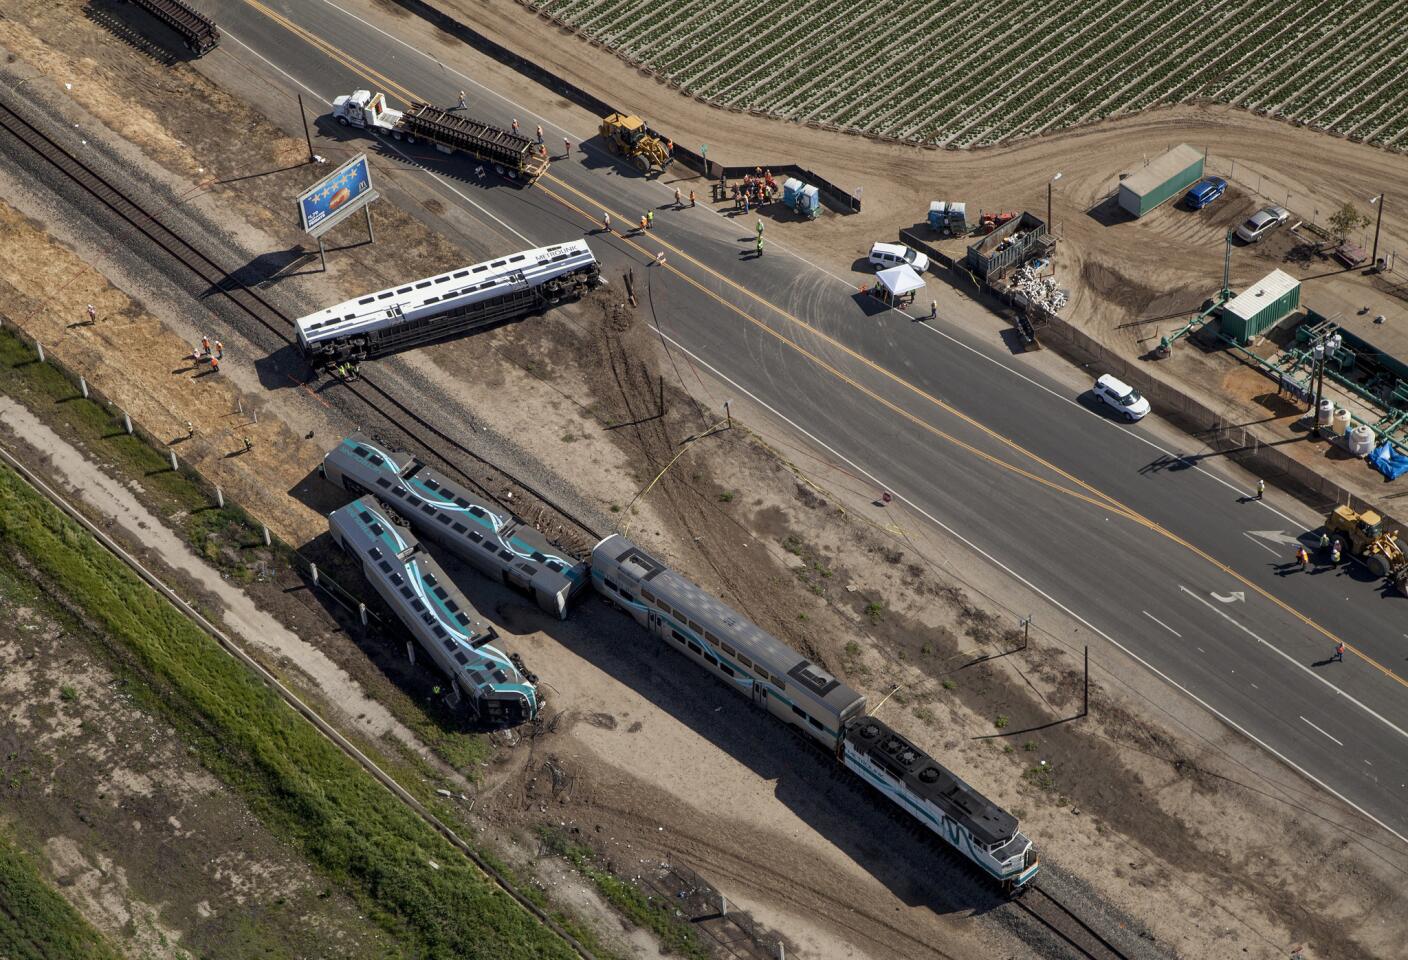 Aerial view of the Metrolink train derailment in Oxnard. The crash occurred at the Rice Avenue crossing, causing three cars to derail and injuring at least 28 people.